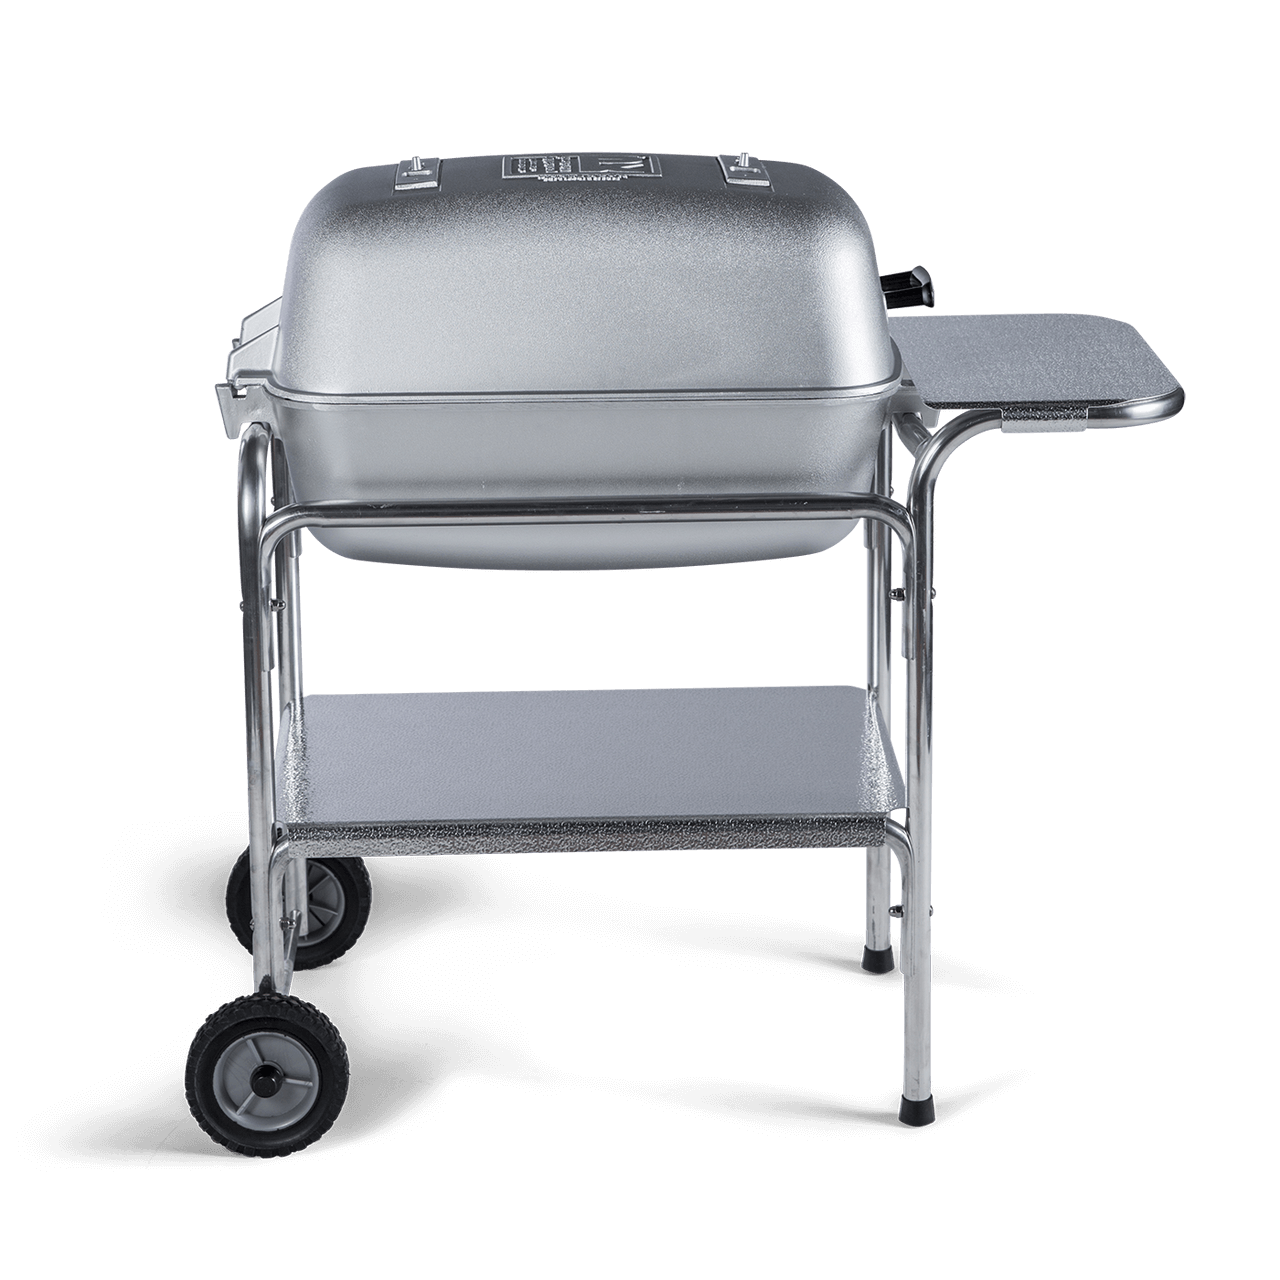 Original PK Grill perfect for a grilling foodie